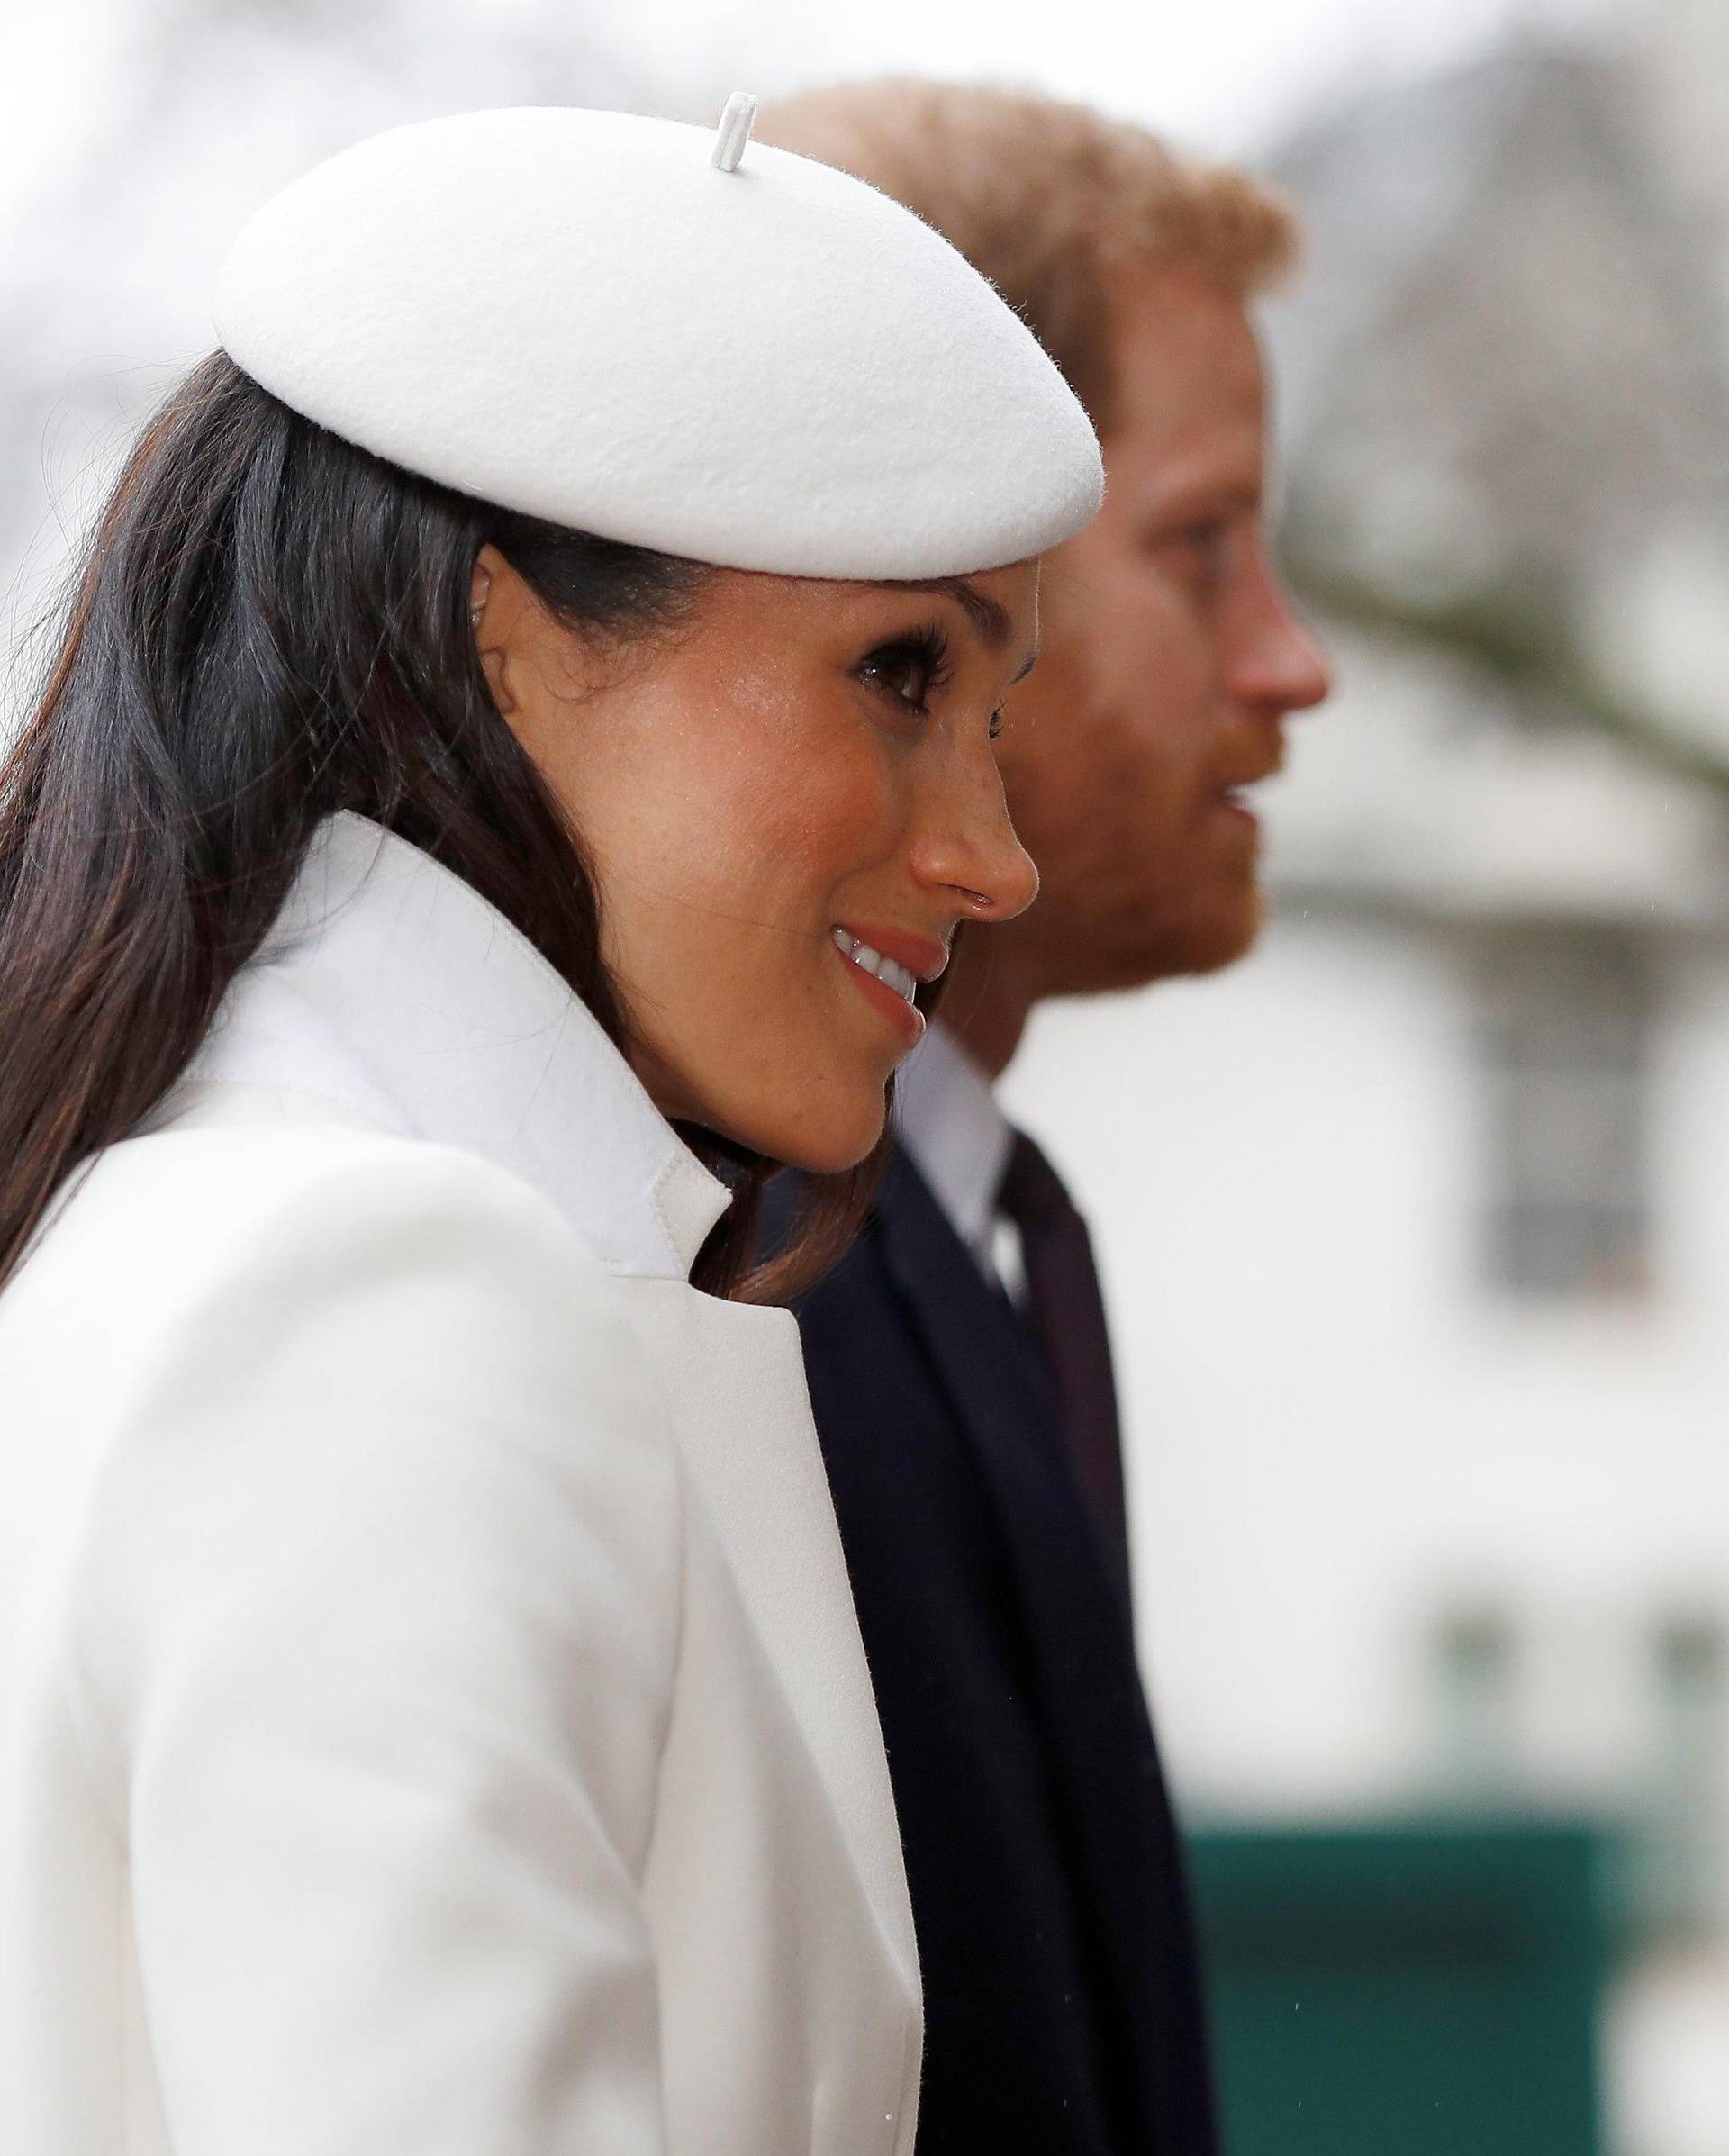 Britain's Prince Harry and his fiancee Meghan Markle arrive at the Commonwealth Service at Westminster Abbey in London